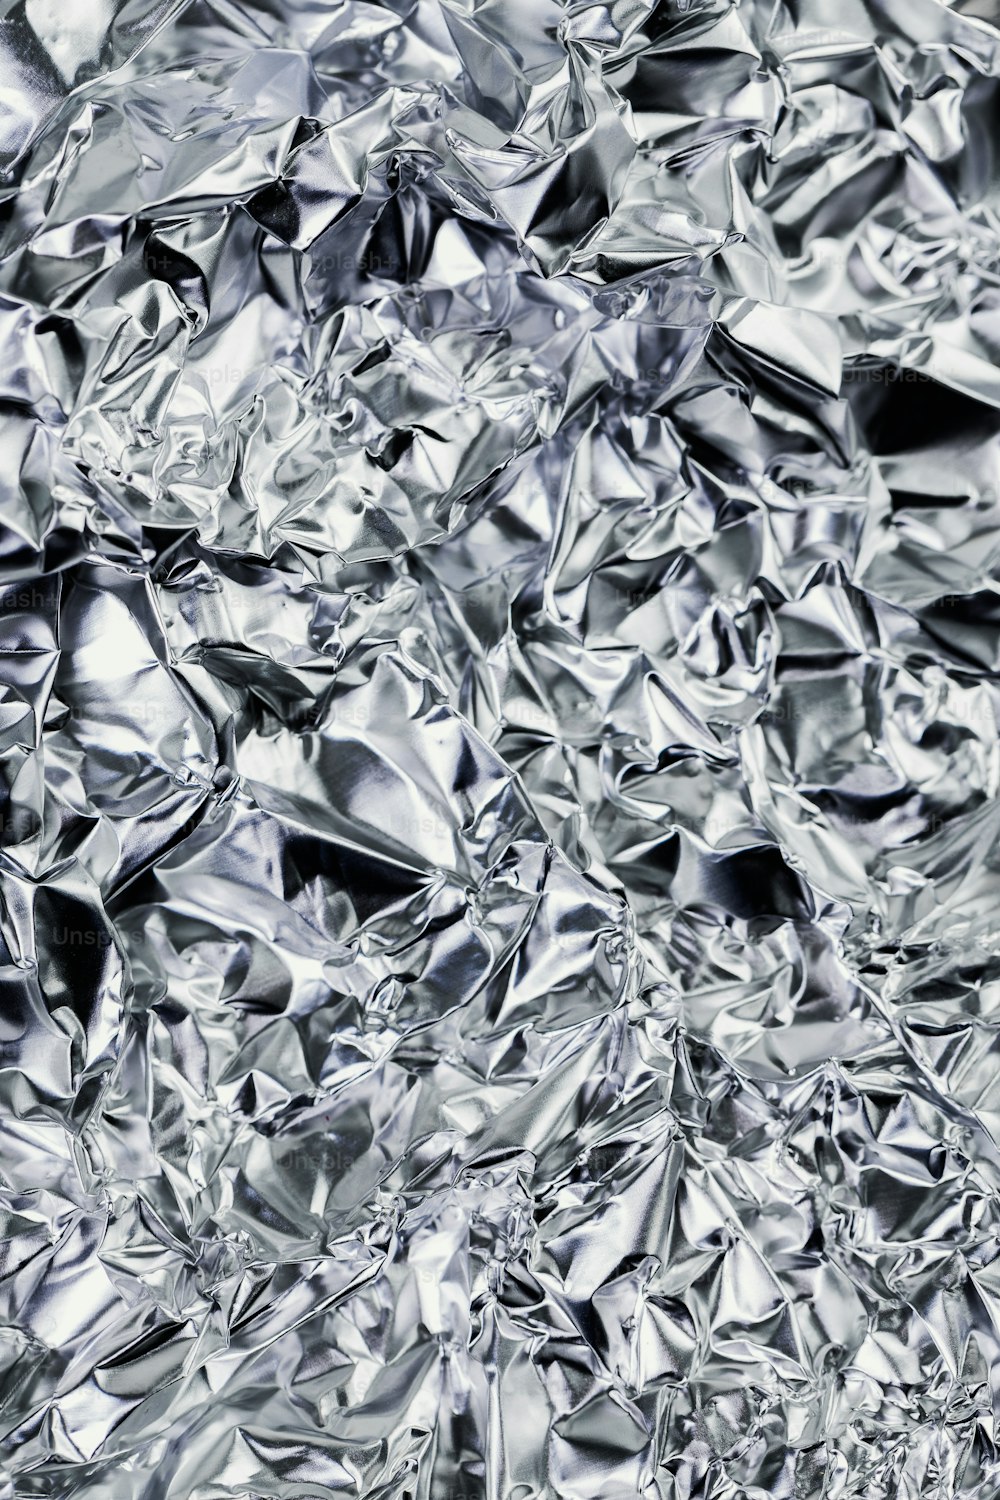 Silver foil texture stock photo. Image of metallic, background - 91823514